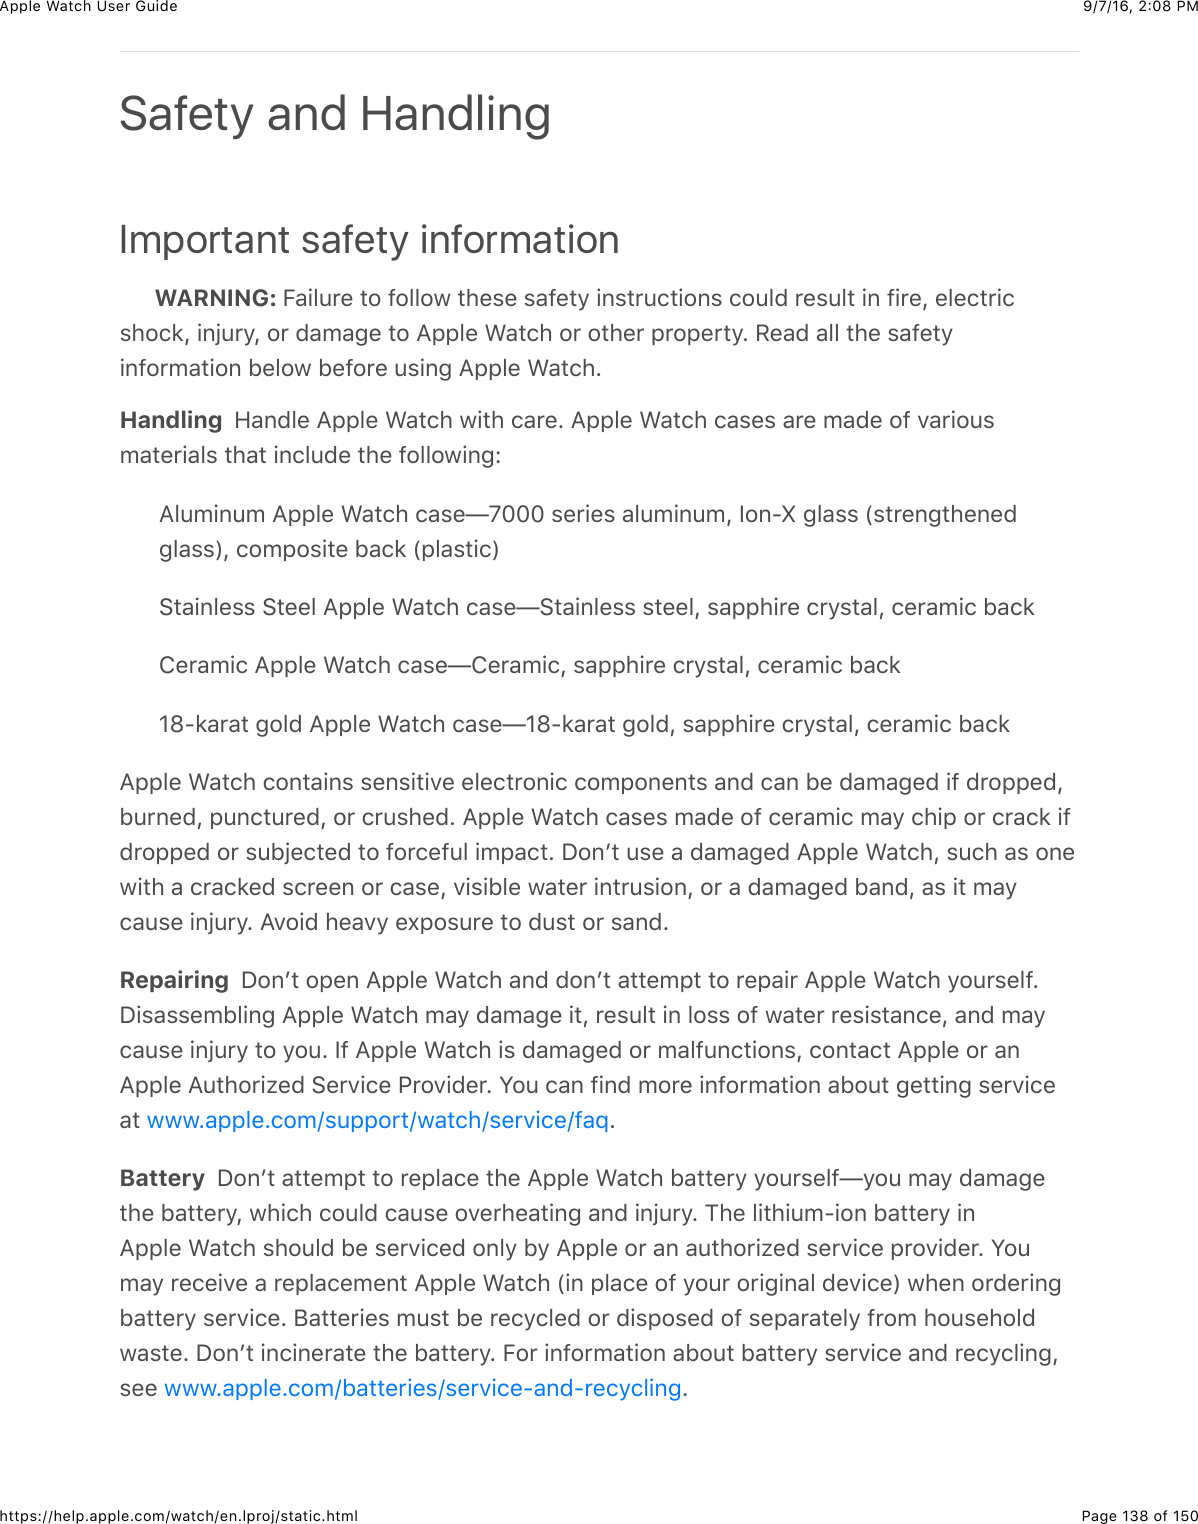 9/7/16, 2)08 PMApple Watch User GuidePage 138 of 150https://help.apple.com/watch/en.lproj/static.htmlImportant safety informationWARNING: E&apos;+&quot;4*%&amp;3#&amp;@#&quot;&quot;#7&amp;3)%$%&amp;$&apos;@%3/&amp;+,$3*4(3+#,$&amp;(#4&quot;0&amp;*%$4&quot;3&amp;+,&amp;@+*%J&amp;%&quot;%(3*+($)#(8J&amp;+,O4*/J&amp;#*&amp;0&apos;5&apos;-%&amp;3#&amp;=22&quot;%&amp;&gt;&apos;3()&amp;#*&amp;#3)%*&amp;2*#2%*3/C&amp;H%&apos;0&amp;&apos;&quot;&quot;&amp;3)%&amp;$&apos;@%3/+,@#*5&apos;3+#,&amp;B%&quot;#7&amp;B%@#*%&amp;4$+,-&amp;=22&quot;%&amp;&gt;&apos;3()CHandling  9&apos;,0&quot;%&amp;=22&quot;%&amp;&gt;&apos;3()&amp;7+3)&amp;(&apos;*%C&amp;=22&quot;%&amp;&gt;&apos;3()&amp;(&apos;$%$&amp;&apos;*%&amp;5&apos;0%&amp;#@&amp;.&apos;*+#4$5&apos;3%*+&apos;&quot;$&amp;3)&apos;3&amp;+,(&quot;40%&amp;3)%&amp;@#&quot;&quot;#7+,-e=&quot;45+,45&amp;=22&quot;%&amp;&gt;&apos;3()&amp;(&apos;$%Tg^^^&amp;$%*+%$&amp;&apos;&quot;45+,45J&amp;Y#,?i&amp;-&quot;&apos;$$&amp;P$3*%,-3)%,%0-&quot;&apos;$$RJ&amp;(#52#$+3%&amp;B&apos;(8&amp;P2&quot;&apos;$3+(R63&apos;+,&quot;%$$&amp;63%%&quot;&amp;=22&quot;%&amp;&gt;&apos;3()&amp;(&apos;$%T63&apos;+,&quot;%$$&amp;$3%%&quot;J&amp;$&apos;22)+*%&amp;(*/$3&apos;&quot;J&amp;(%*&apos;5+(&amp;B&apos;(8!%*&apos;5+(&amp;=22&quot;%&amp;&gt;&apos;3()&amp;(&apos;$%T!%*&apos;5+(J&amp;$&apos;22)+*%&amp;(*/$3&apos;&quot;J&amp;(%*&apos;5+(&amp;B&apos;(8]f?8&apos;*&apos;3&amp;-#&quot;0&amp;=22&quot;%&amp;&gt;&apos;3()&amp;(&apos;$%T]f?8&apos;*&apos;3&amp;-#&quot;0J&amp;$&apos;22)+*%&amp;(*/$3&apos;&quot;J&amp;(%*&apos;5+(&amp;B&apos;(8=22&quot;%&amp;&gt;&apos;3()&amp;(#,3&apos;+,$&amp;$%,$+3+.%&amp;%&quot;%(3*#,+(&amp;(#52#,%,3$&amp;&apos;,0&amp;(&apos;,&amp;B%&amp;0&apos;5&apos;-%0&amp;+@&amp;0*#22%0JB4*,%0J&amp;24,(34*%0J&amp;#*&amp;(*4$)%0C&amp;=22&quot;%&amp;&gt;&apos;3()&amp;(&apos;$%$&amp;5&apos;0%&amp;#@&amp;(%*&apos;5+(&amp;5&apos;/&amp;()+2&amp;#*&amp;(*&apos;(8&amp;+@0*#22%0&amp;#*&amp;$4BO%(3%0&amp;3#&amp;@#*(%@4&quot;&amp;+52&apos;(3C&amp;I#,W3&amp;4$%&amp;&apos;&amp;0&apos;5&apos;-%0&amp;=22&quot;%&amp;&gt;&apos;3()J&amp;$4()&amp;&apos;$&amp;#,%7+3)&amp;&apos;&amp;(*&apos;(8%0&amp;$(*%%,&amp;#*&amp;(&apos;$%J&amp;.+$+B&quot;%&amp;7&apos;3%*&amp;+,3*4$+#,J&amp;#*&amp;&apos;&amp;0&apos;5&apos;-%0&amp;B&apos;,0J&amp;&apos;$&amp;+3&amp;5&apos;/(&apos;4$%&amp;+,O4*/C&amp;=.#+0&amp;)%&apos;./&amp;%U2#$4*%&amp;3#&amp;04$3&amp;#*&amp;$&apos;,0CRepairing  I#,W3&amp;#2%,&amp;=22&quot;%&amp;&gt;&apos;3()&amp;&apos;,0&amp;0#,W3&amp;&apos;33%523&amp;3#&amp;*%2&apos;+*&amp;=22&quot;%&amp;&gt;&apos;3()&amp;/#4*$%&quot;@CI+$&apos;$$%5B&quot;+,-&amp;=22&quot;%&amp;&gt;&apos;3()&amp;5&apos;/&amp;0&apos;5&apos;-%&amp;+3J&amp;*%$4&quot;3&amp;+,&amp;&quot;#$$&amp;#@&amp;7&apos;3%*&amp;*%$+$3&apos;,(%J&amp;&apos;,0&amp;5&apos;/(&apos;4$%&amp;+,O4*/&amp;3#&amp;/#4C&amp;Y@&amp;=22&quot;%&amp;&gt;&apos;3()&amp;+$&amp;0&apos;5&apos;-%0&amp;#*&amp;5&apos;&quot;@4,(3+#,$J&amp;(#,3&apos;(3&amp;=22&quot;%&amp;#*&amp;&apos;,=22&quot;%&amp;=43)#*+N%0&amp;6%*.+(%&amp;G*#.+0%*C&amp;S#4&amp;(&apos;,&amp;@+,0&amp;5#*%&amp;+,@#*5&apos;3+#,&amp;&apos;B#43&amp;-%33+,-&amp;$%*.+(%&apos;3&amp; CBattery  I#,W3&amp;&apos;33%523&amp;3#&amp;*%2&quot;&apos;(%&amp;3)%&amp;=22&quot;%&amp;&gt;&apos;3()&amp;B&apos;33%*/&amp;/#4*$%&quot;@T/#4&amp;5&apos;/&amp;0&apos;5&apos;-%3)%&amp;B&apos;33%*/J&amp;7)+()&amp;(#4&quot;0&amp;(&apos;4$%&amp;#.%*)%&apos;3+,-&amp;&apos;,0&amp;+,O4*/C&amp;1)%&amp;&quot;+3)+45?+#,&amp;B&apos;33%*/&amp;+,=22&quot;%&amp;&gt;&apos;3()&amp;$)#4&quot;0&amp;B%&amp;$%*.+(%0&amp;#,&quot;/&amp;B/&amp;=22&quot;%&amp;#*&amp;&apos;,&amp;&apos;43)#*+N%0&amp;$%*.+(%&amp;2*#.+0%*C&amp;S#45&apos;/&amp;*%(%+.%&amp;&apos;&amp;*%2&quot;&apos;(%5%,3&amp;=22&quot;%&amp;&gt;&apos;3()&amp;P+,&amp;2&quot;&apos;(%&amp;#@&amp;/#4*&amp;#*+-+,&apos;&quot;&amp;0%.+(%R&amp;7)%,&amp;#*0%*+,-B&apos;33%*/&amp;$%*.+(%C&amp;;&apos;33%*+%$&amp;54$3&amp;B%&amp;*%(/(&quot;%0&amp;#*&amp;0+$2#$%0&amp;#@&amp;$%2&apos;*&apos;3%&quot;/&amp;@*#5&amp;)#4$%)#&quot;07&apos;$3%C&amp;I#,W3&amp;+,(+,%*&apos;3%&amp;3)%&amp;B&apos;33%*/C&amp;E#*&amp;+,@#*5&apos;3+#,&amp;&apos;B#43&amp;B&apos;33%*/&amp;$%*.+(%&amp;&apos;,0&amp;*%(/(&quot;+,-J$%%&amp; CSafety and Handling777C&apos;22&quot;%C(#5o$422#*3o7&apos;3()o$%*.+(%o@&apos;X777C&apos;22&quot;%C(#5oB&apos;33%*+%$o$%*.+(%?&apos;,0?*%(/(&quot;+,-